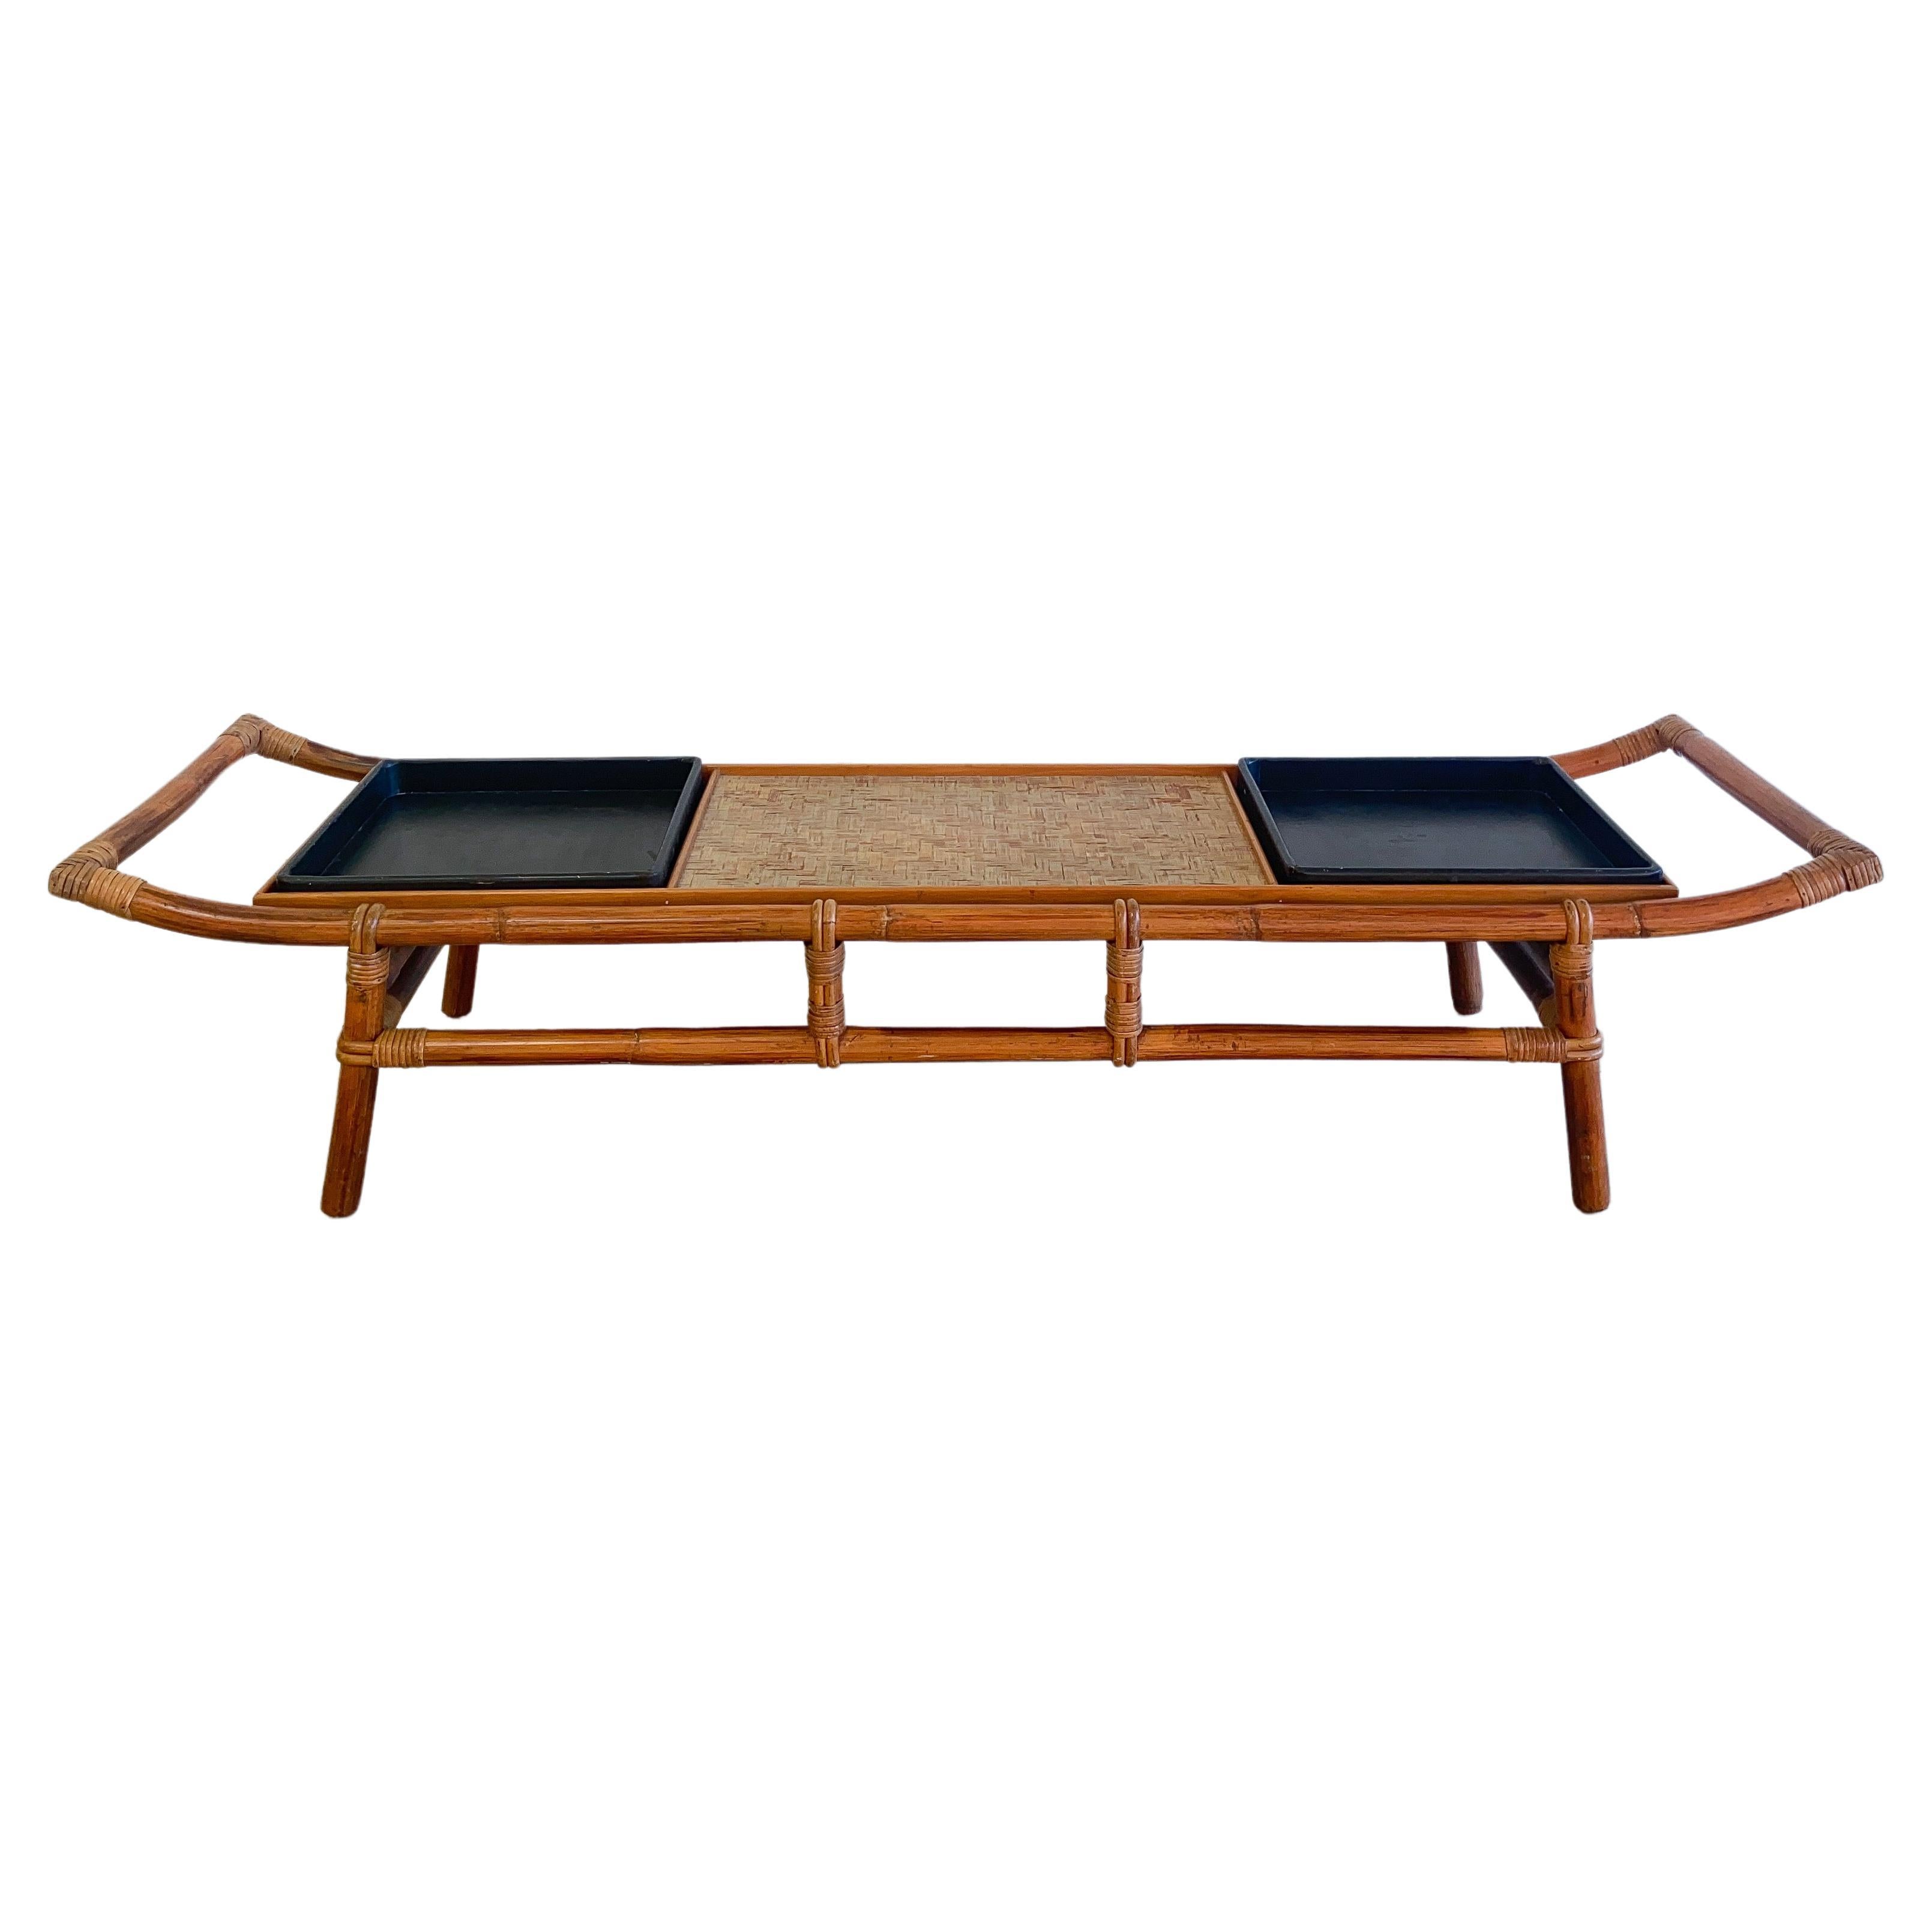 John Wisner for Ficks Reed Pagoda Coffee Table/Bench, Bamboo and Cane, 1950's For Sale